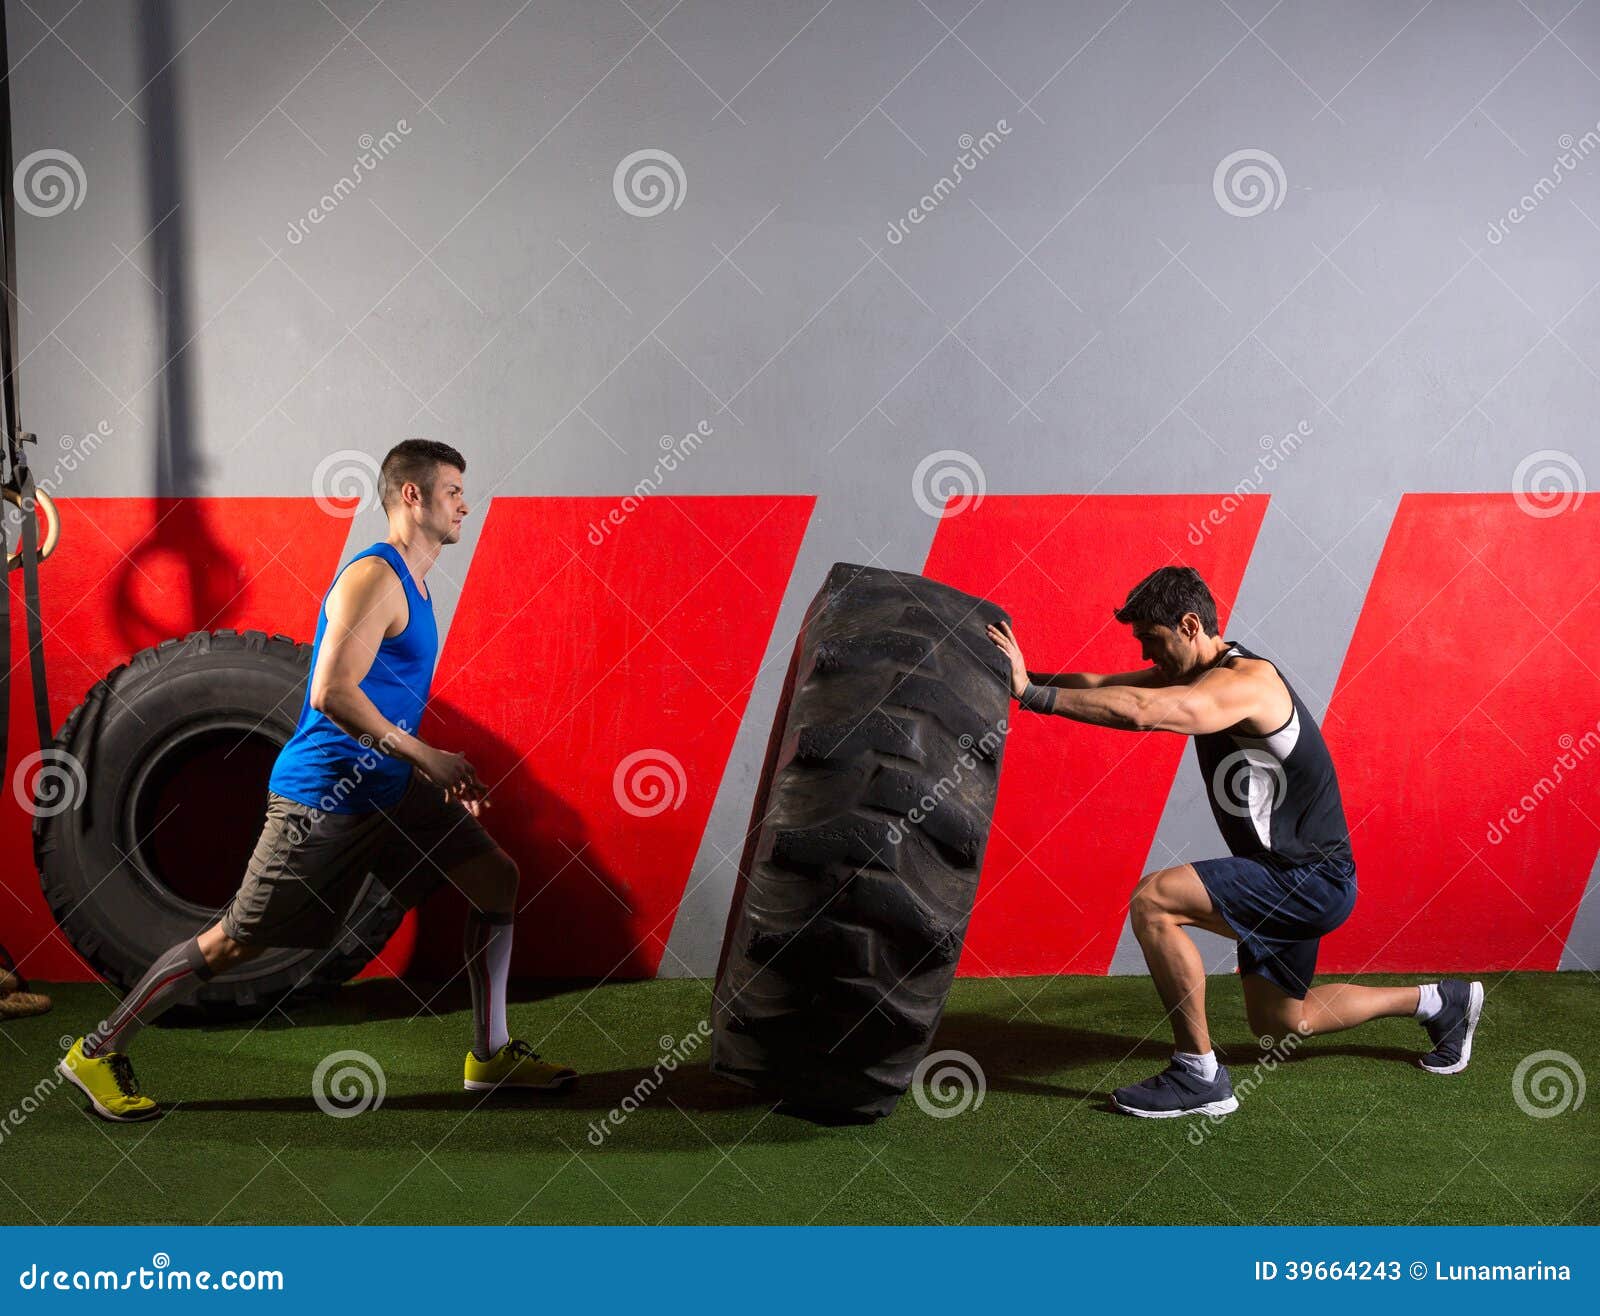  Where to get tractor tires for workouts for Gym